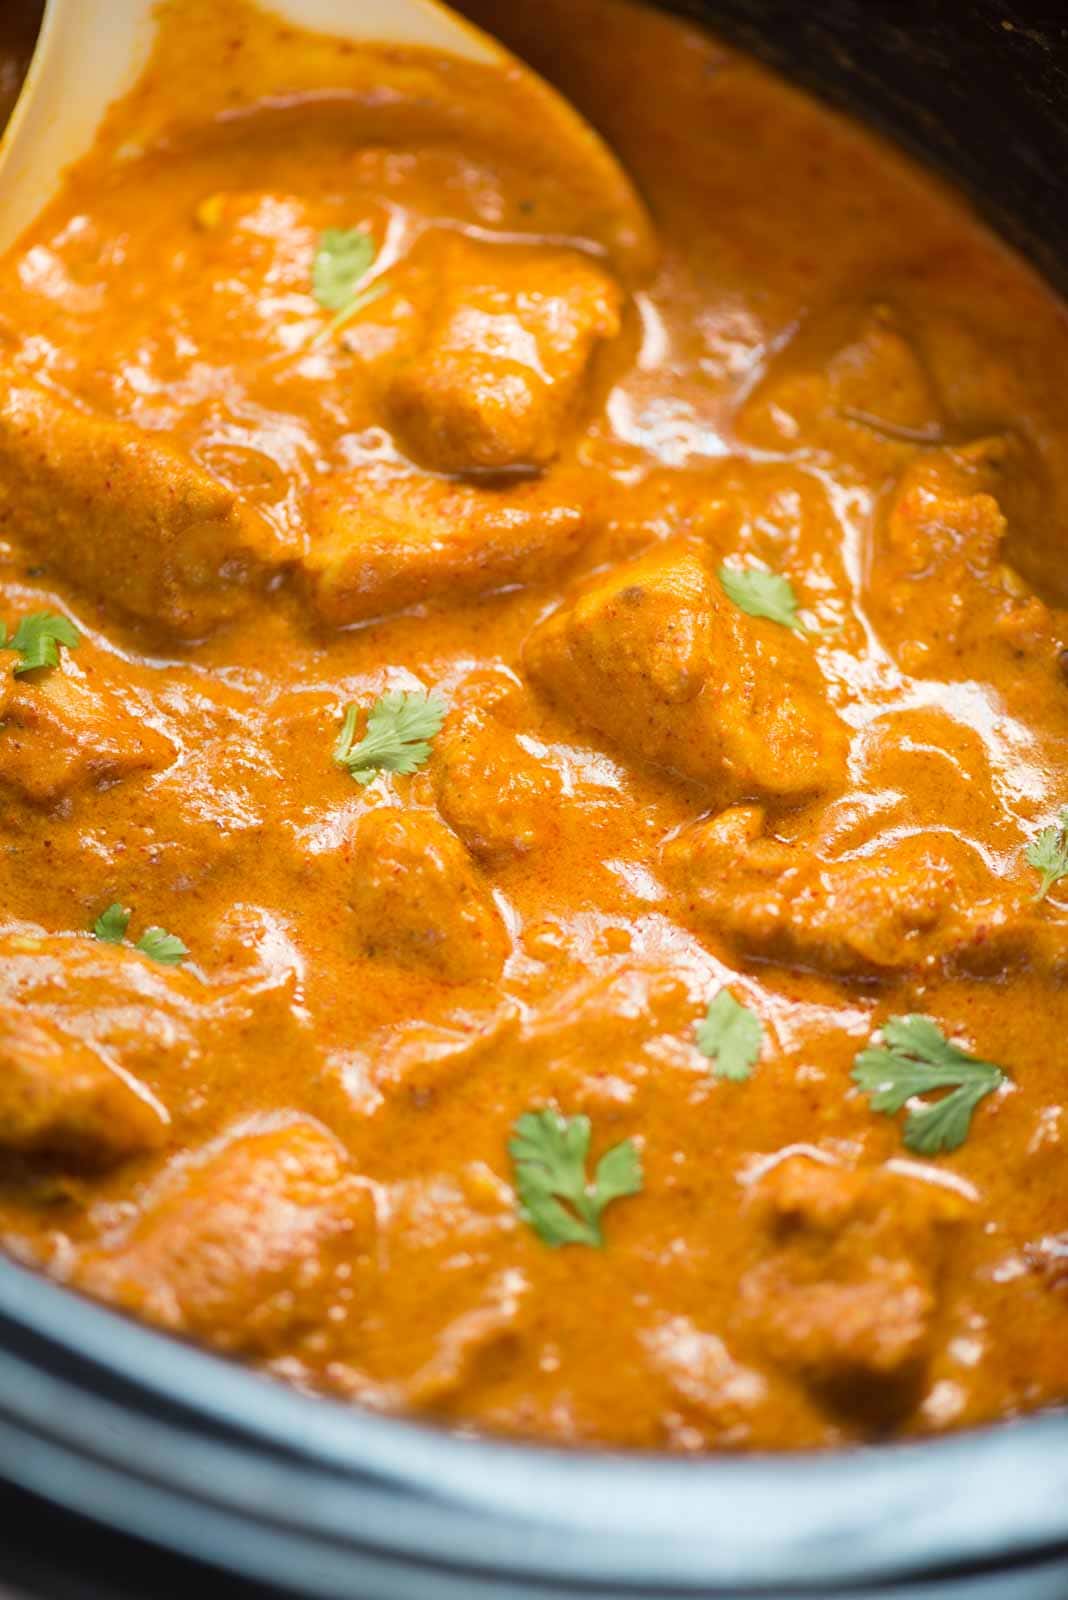 Coconut Chicken Curry, Chicken slow-cooked in sauteed onion, ginger garlic, spices, and coconut milk until juicy and tender. Perfect to pair with rice or roti/naan. 